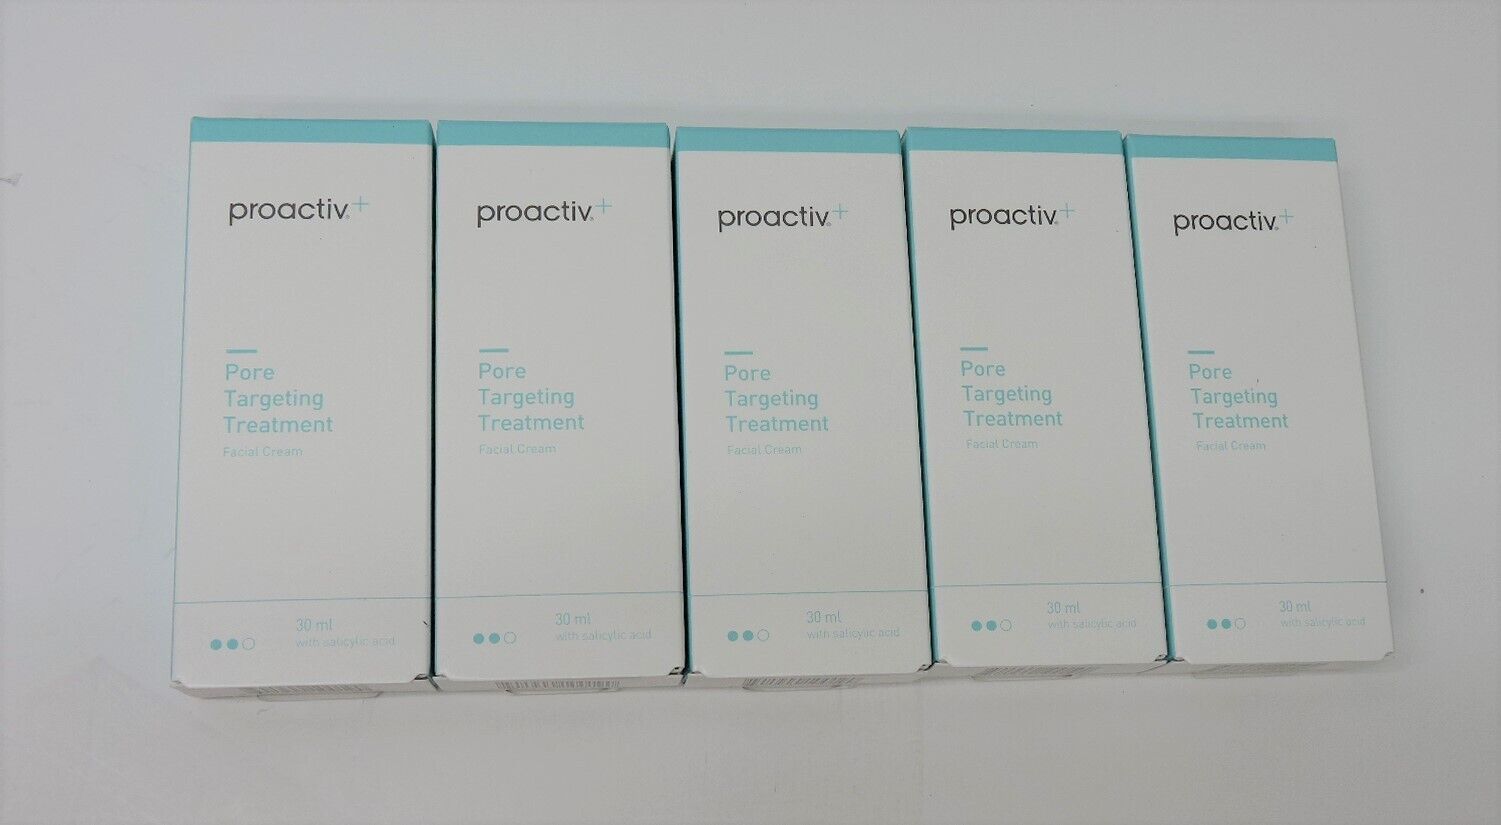 Lot of 5 - Proactive Pore Targeting Treatment 30ml each - $21.46